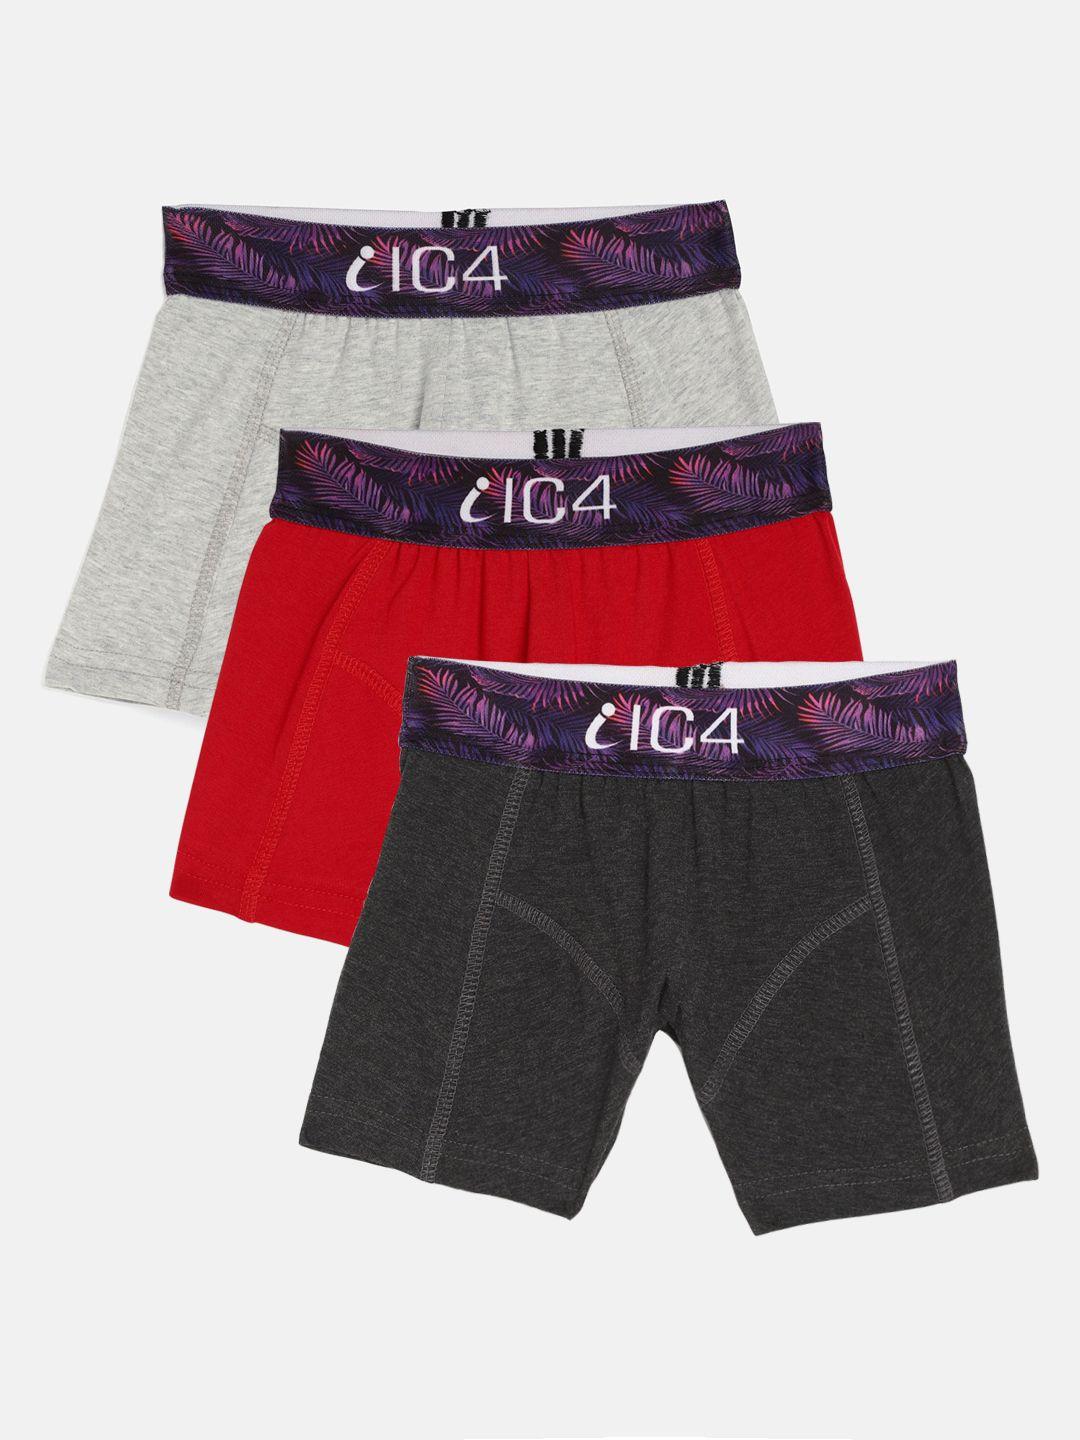 ic4 boys pack of 3 solid trunks 0c-g-r-2002p3